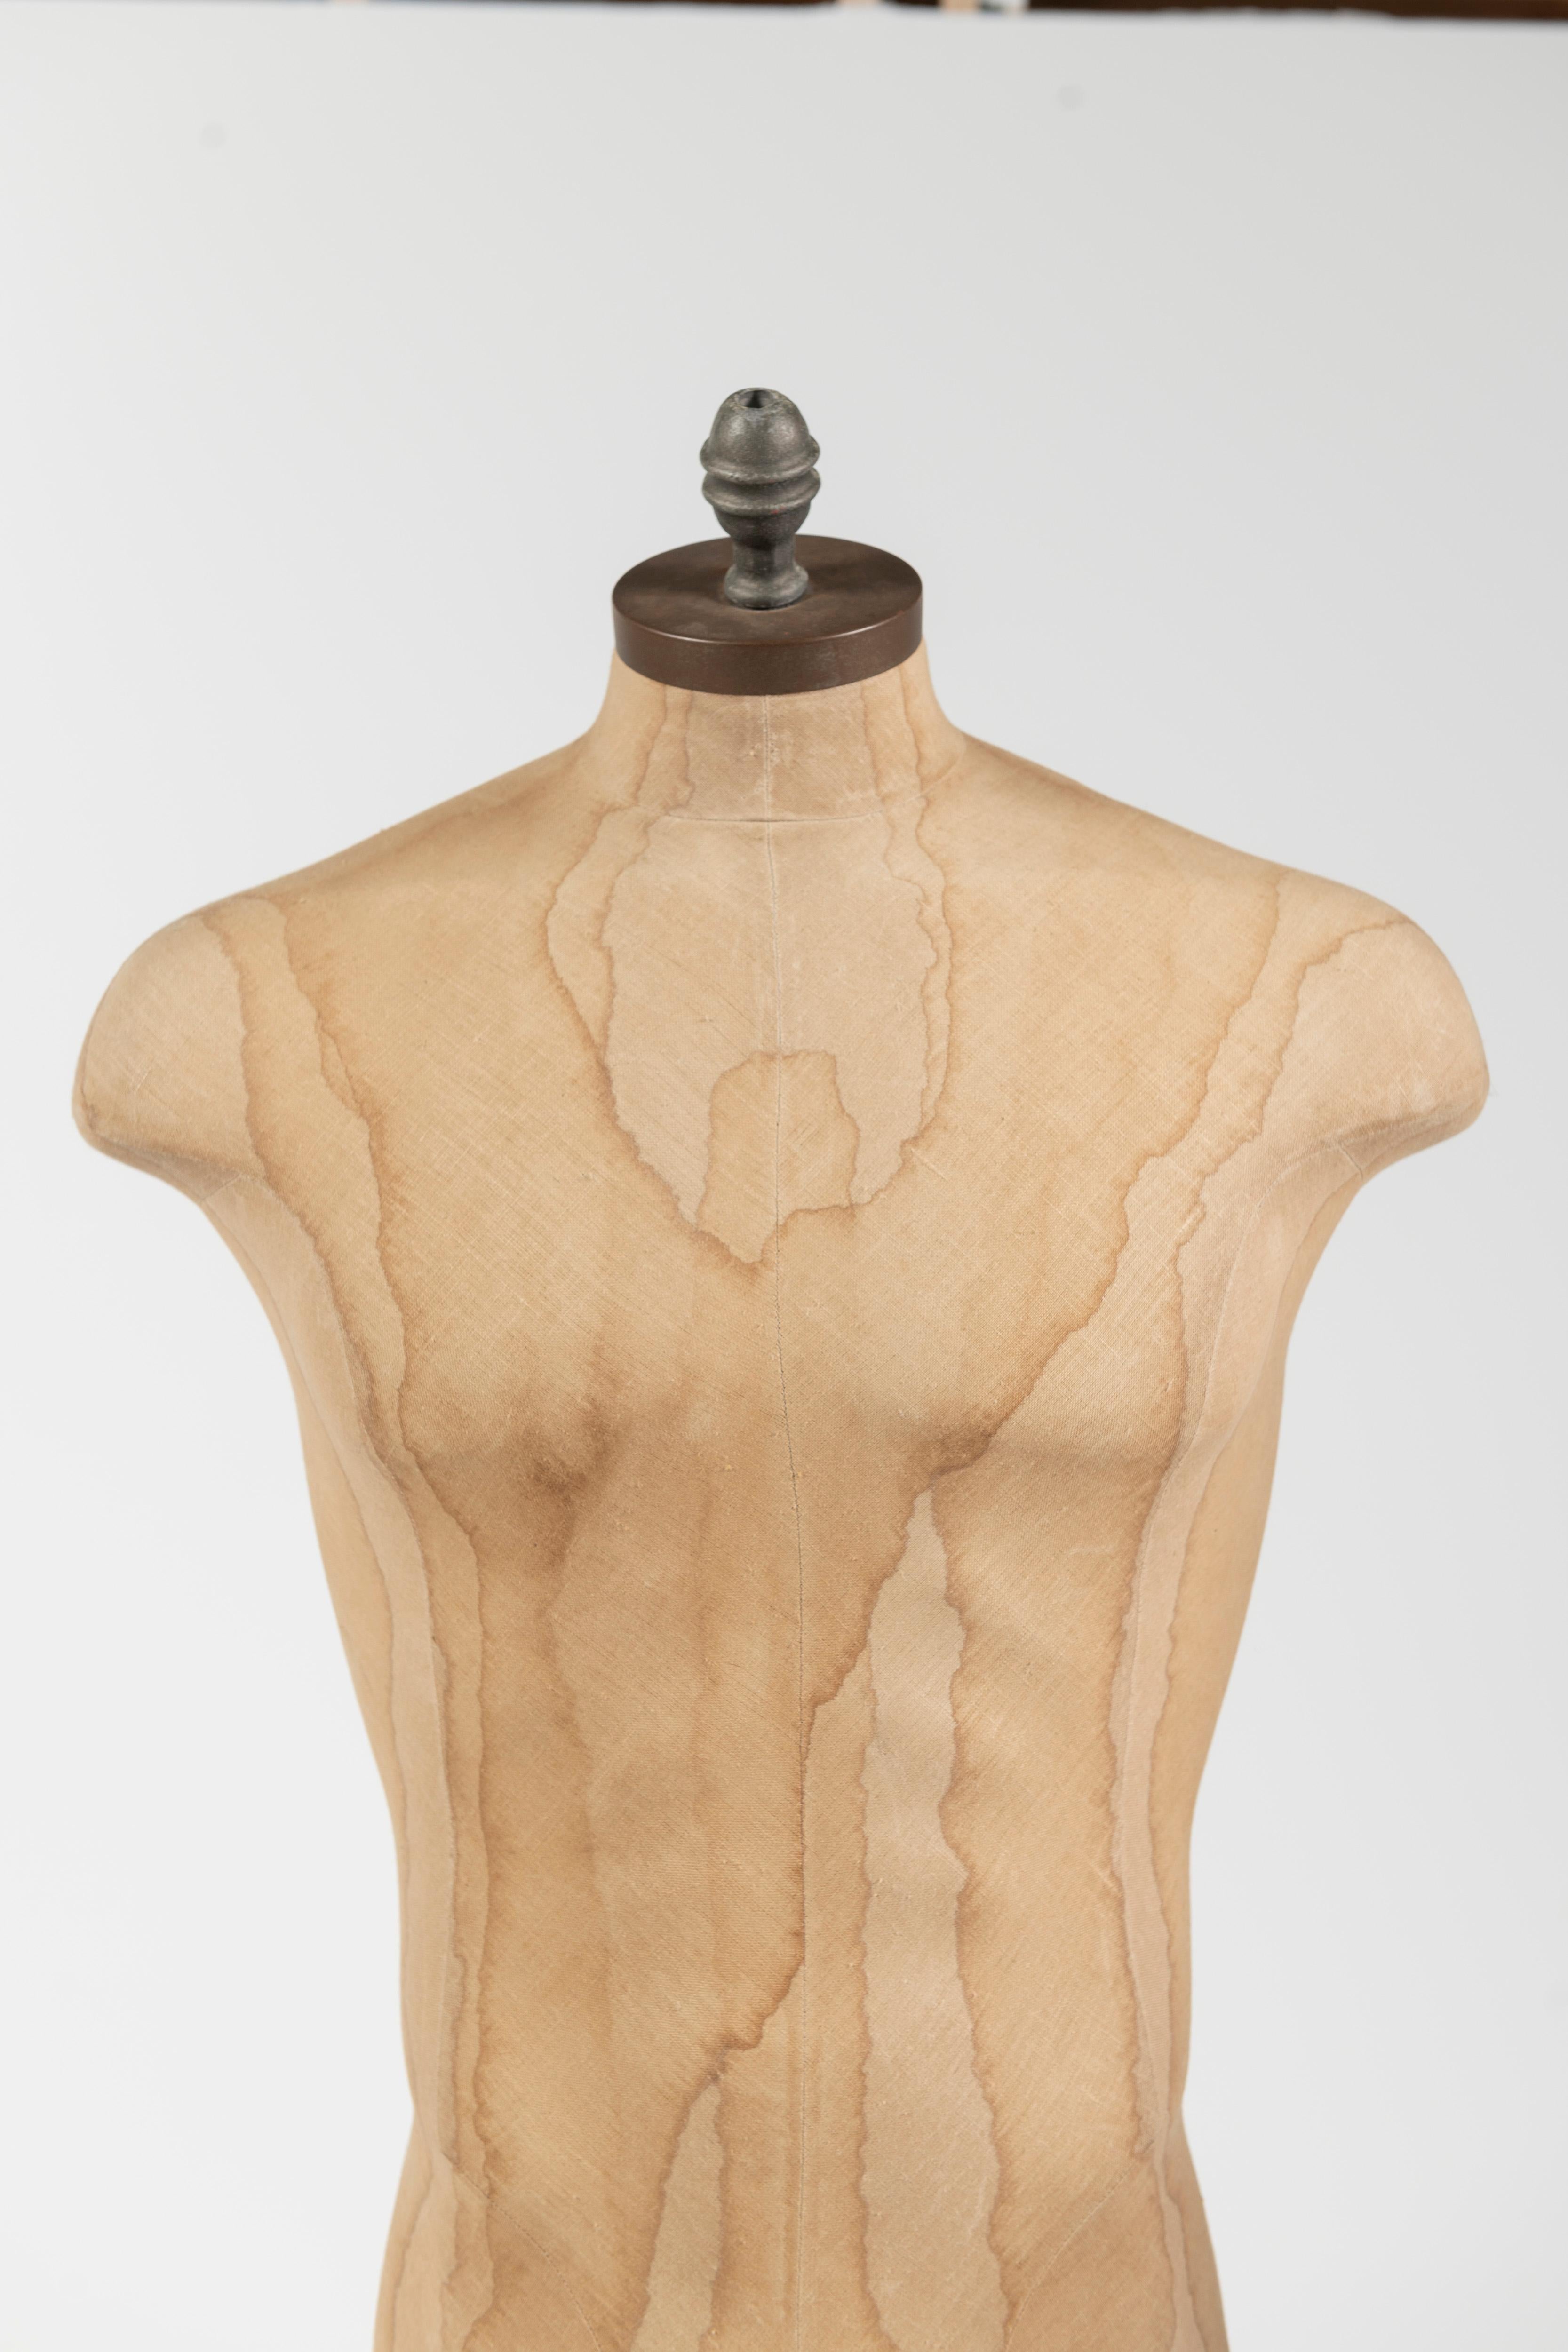 Industry grade mature male torso dress form/mannequin adjusts from 4 to 6 feet in height by applying your foot to the pedal on the stand. The chest measurement is approximately 44